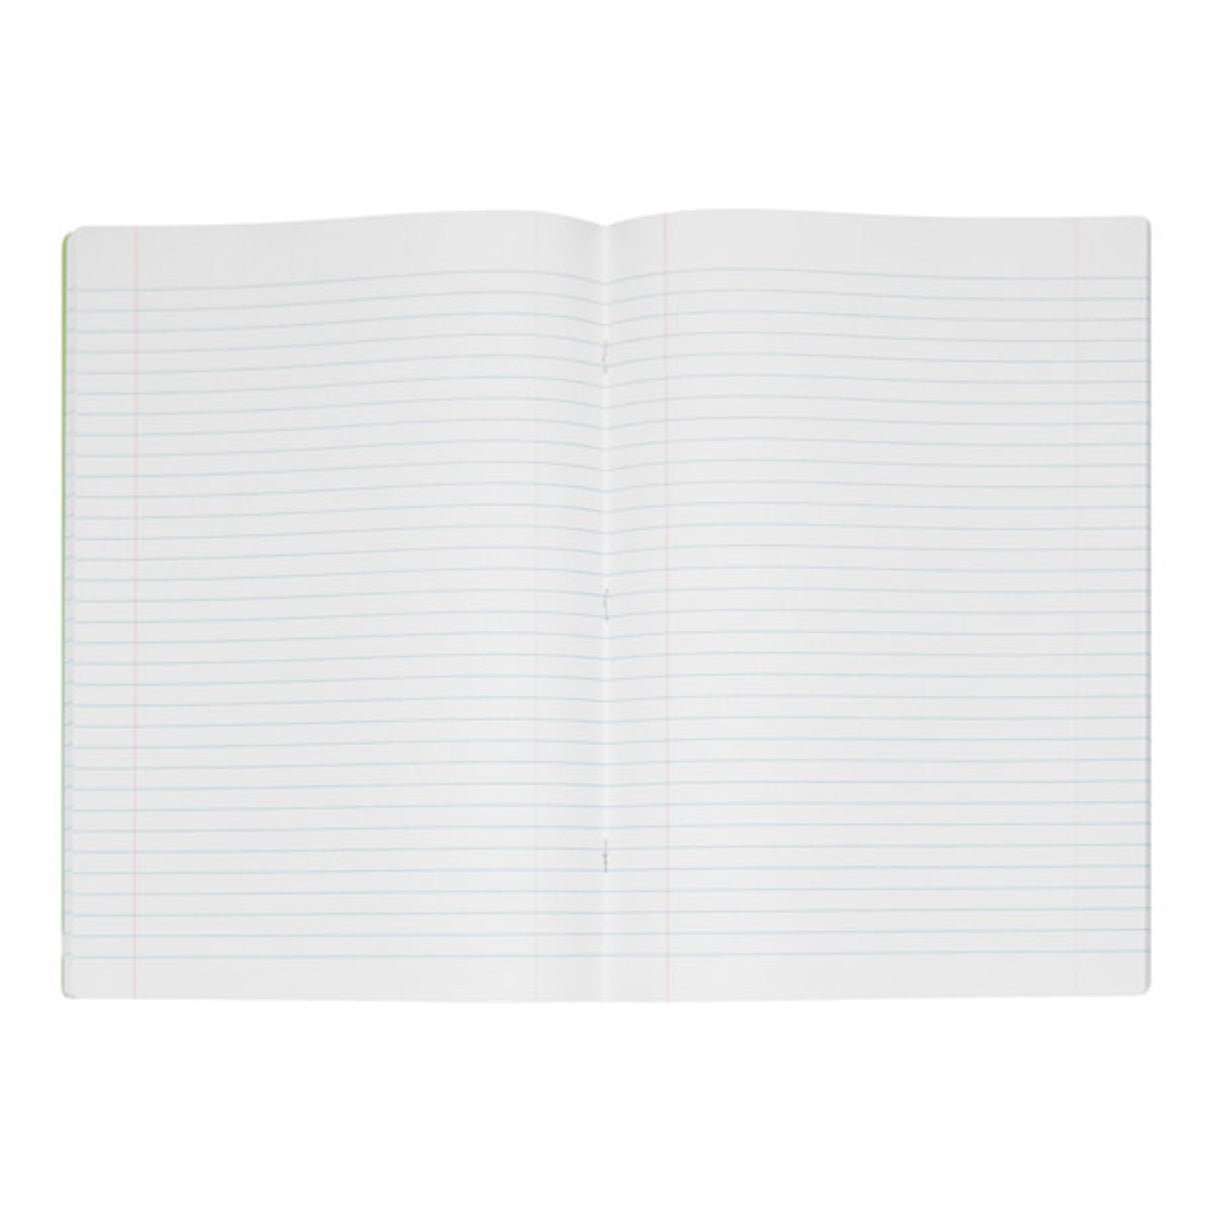 Premto A4 Durable Cover Manuscript Book - 120 Pages - Caterpillar Green | Stationery Shop UK